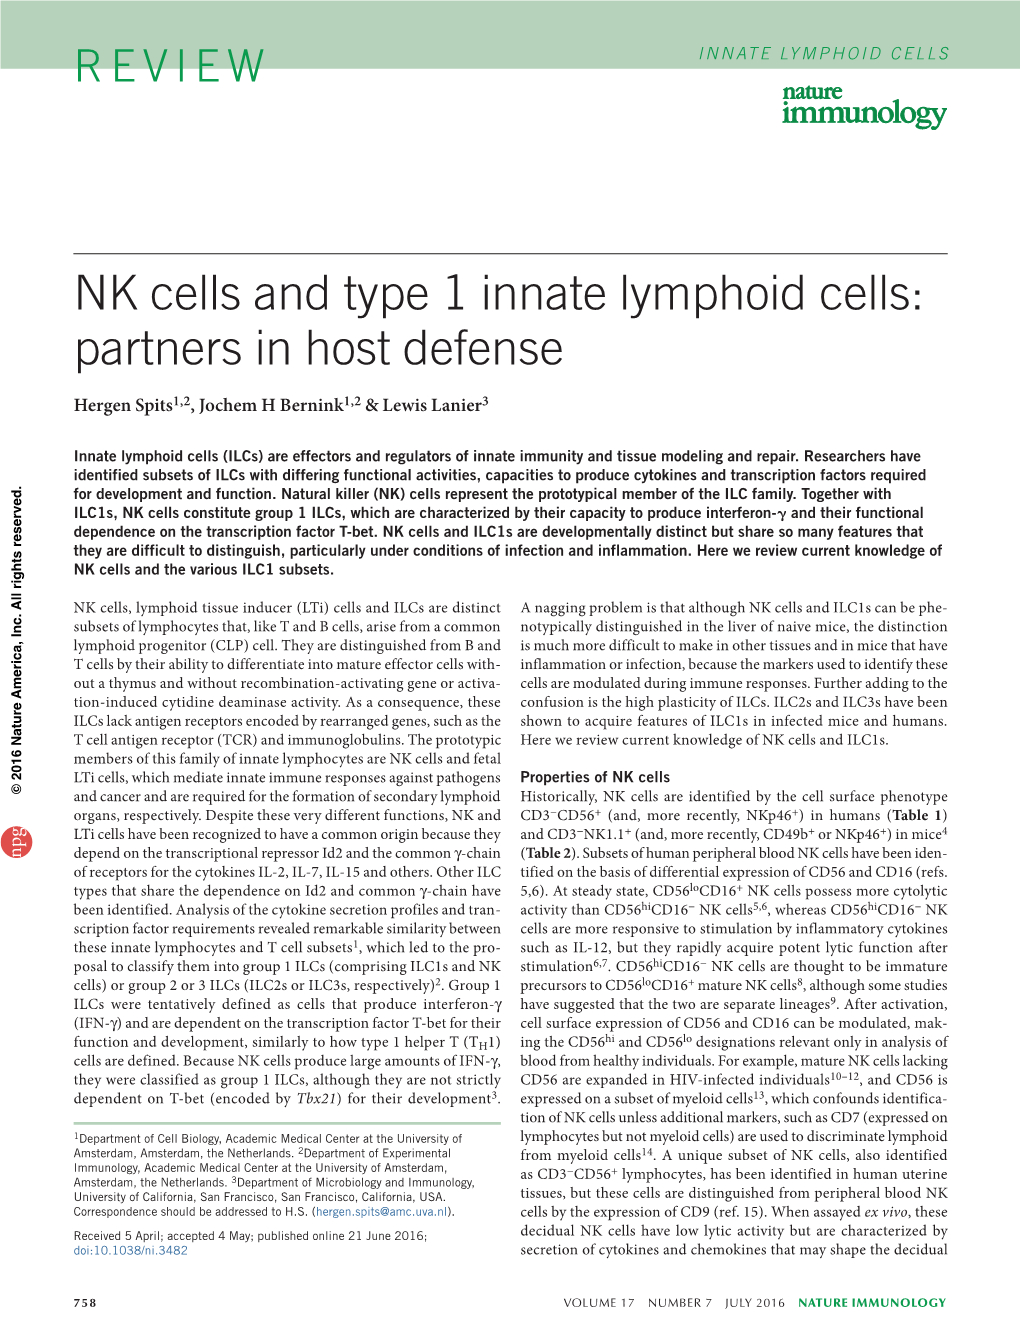 NK Cells and Type 1 Innate Lymphoid Cells: Partners in Host Defense